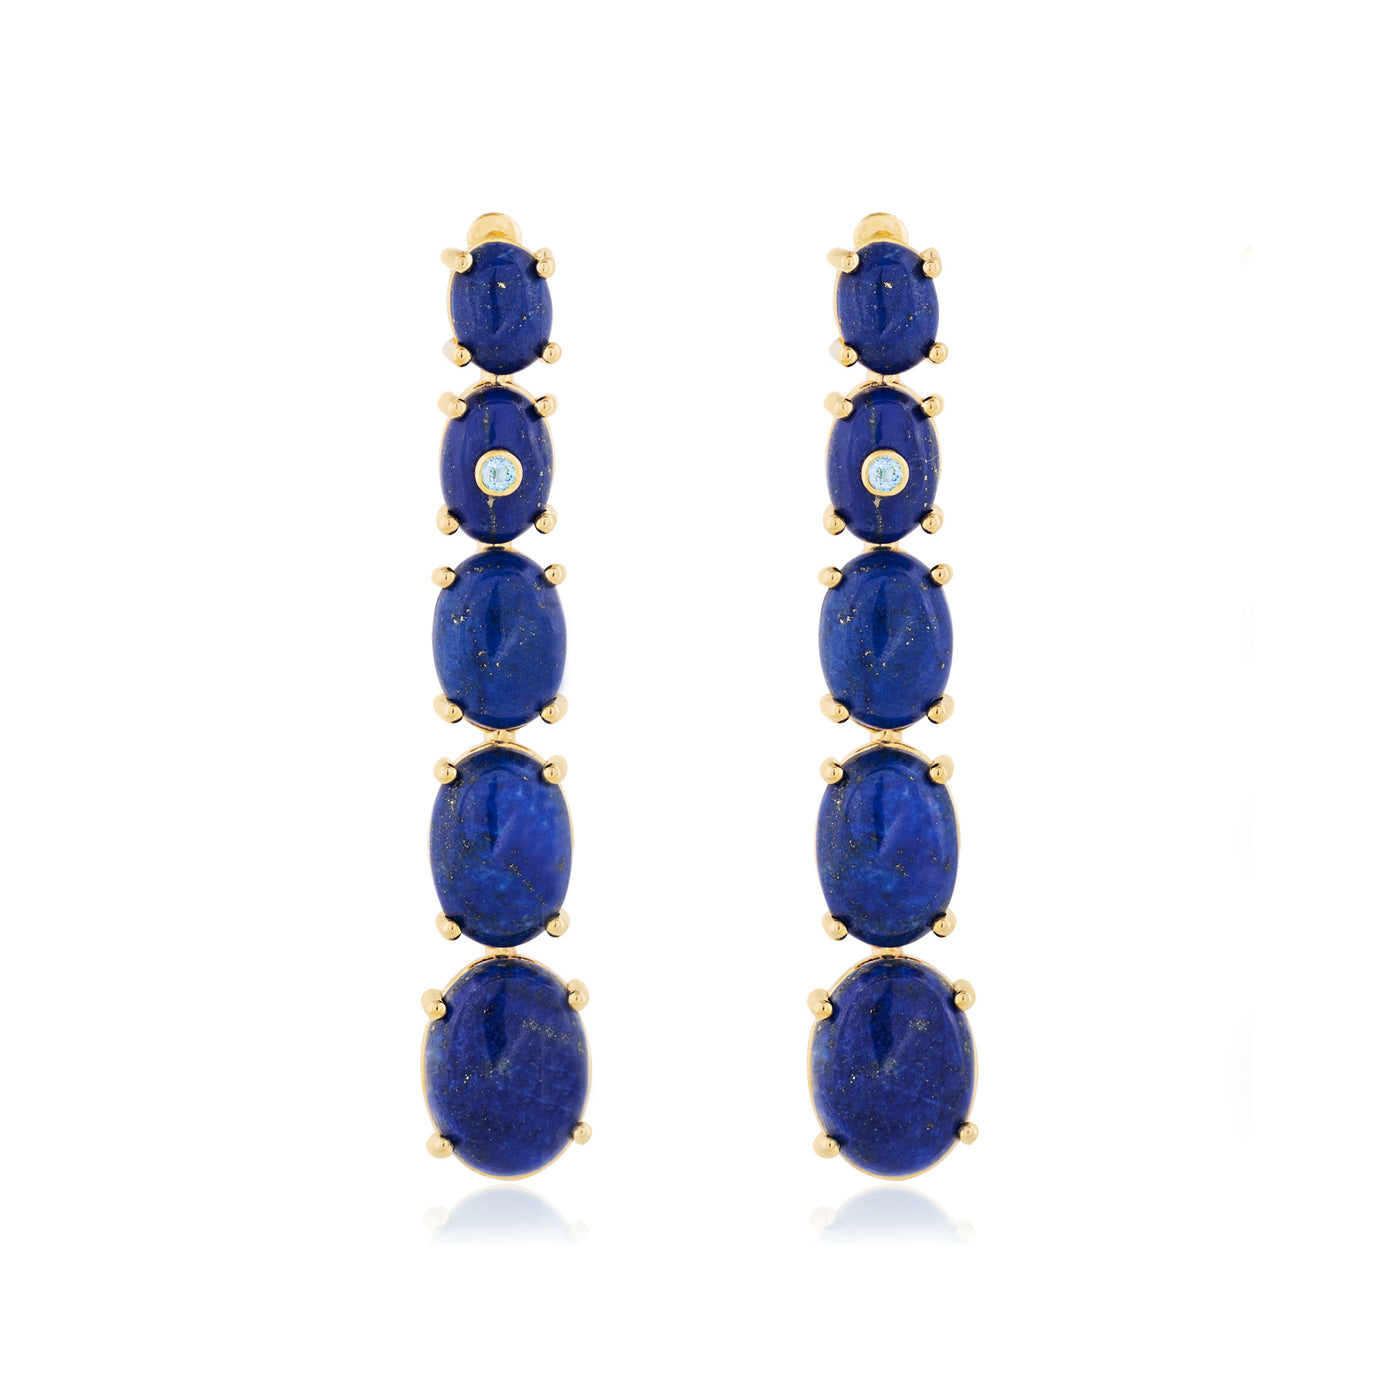 fine jewelry earrings in gold with blue lapis lazuli and blue aquamarine gemstones from Atelier ORMAN